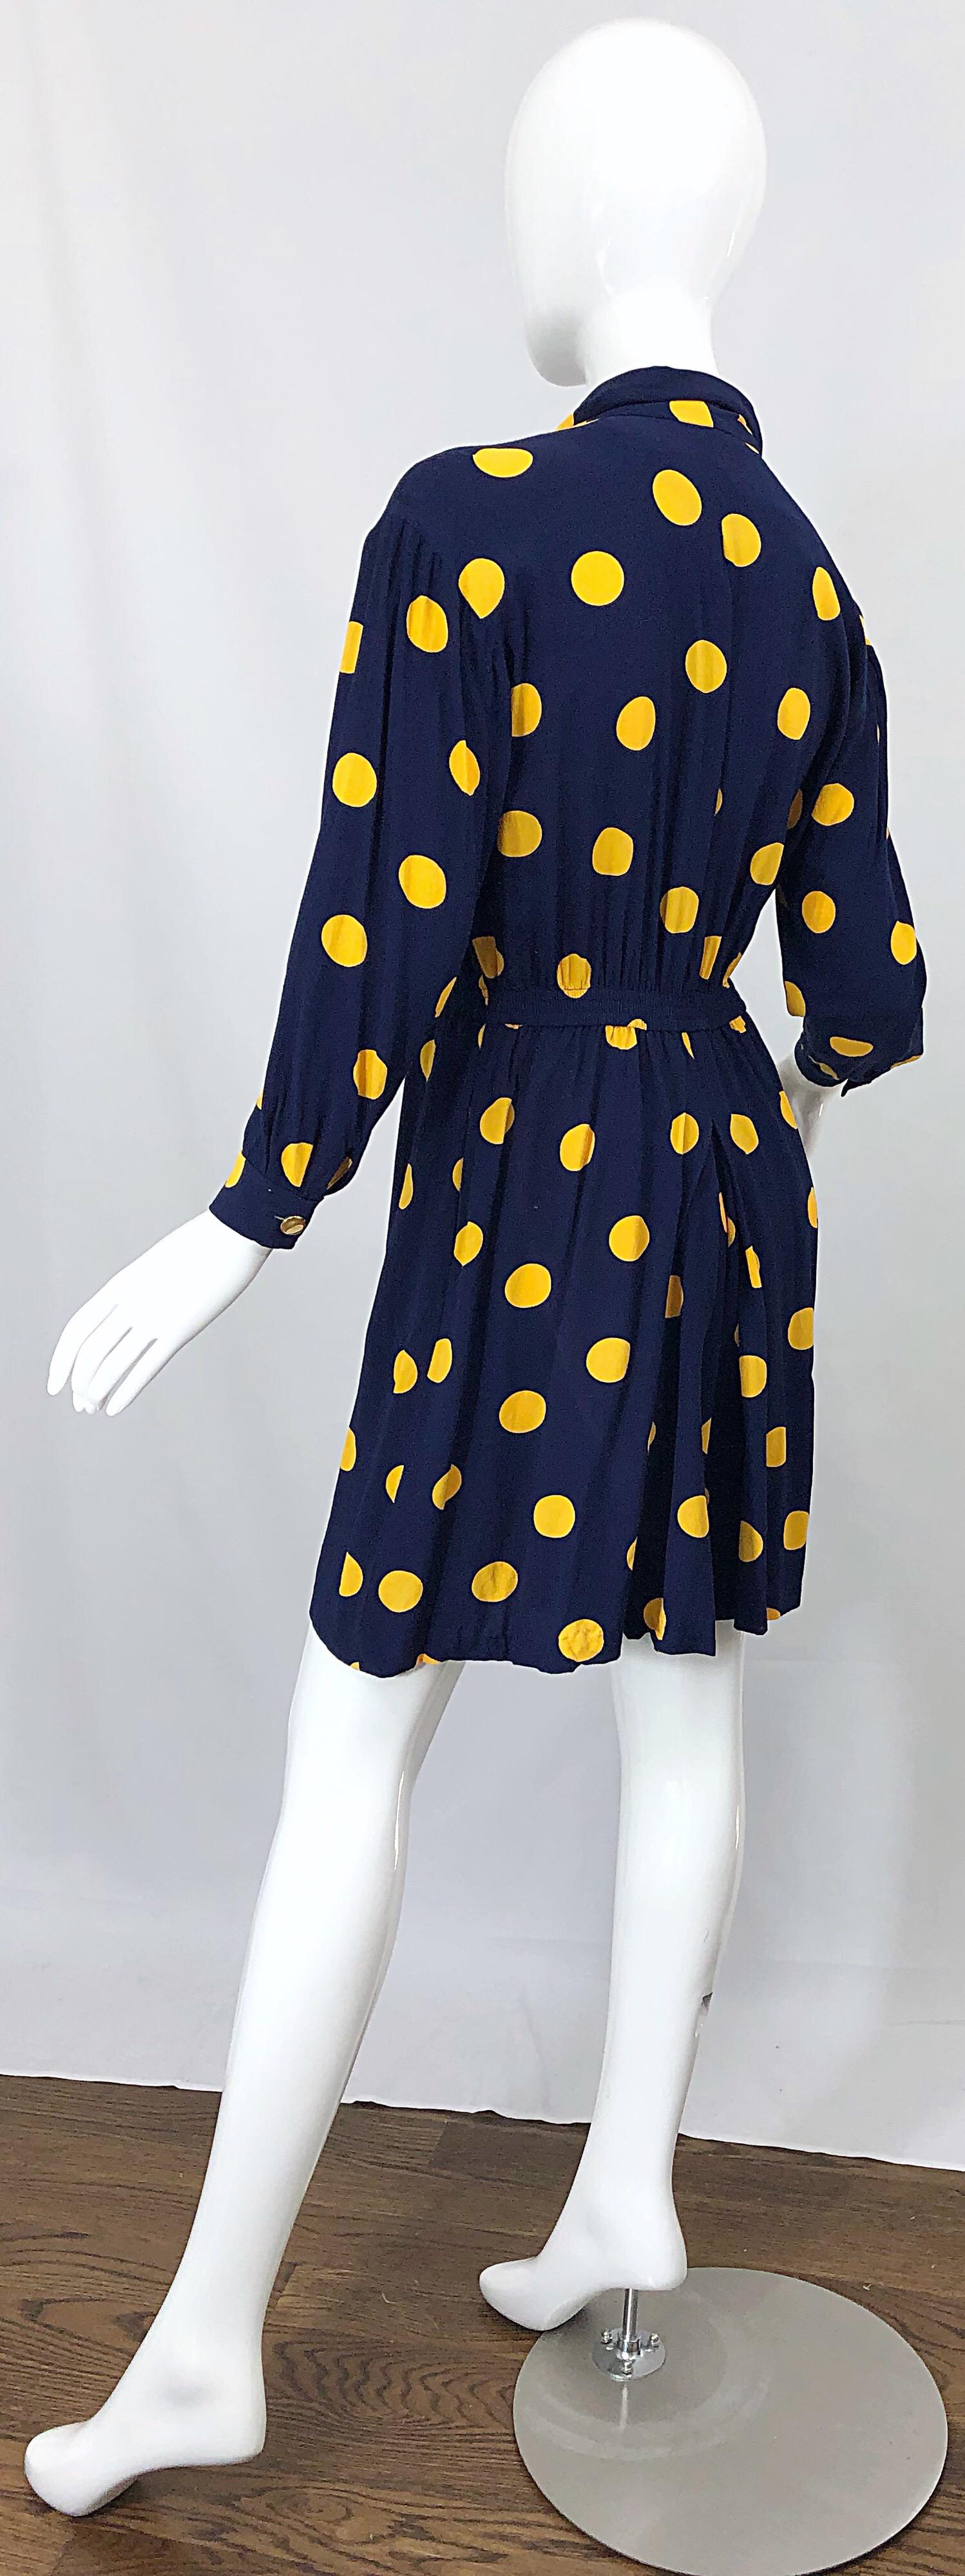 Size 8 Romper Late 1980s Navy Blue and Yellow Polka Dot 80s Vintage Romper 7